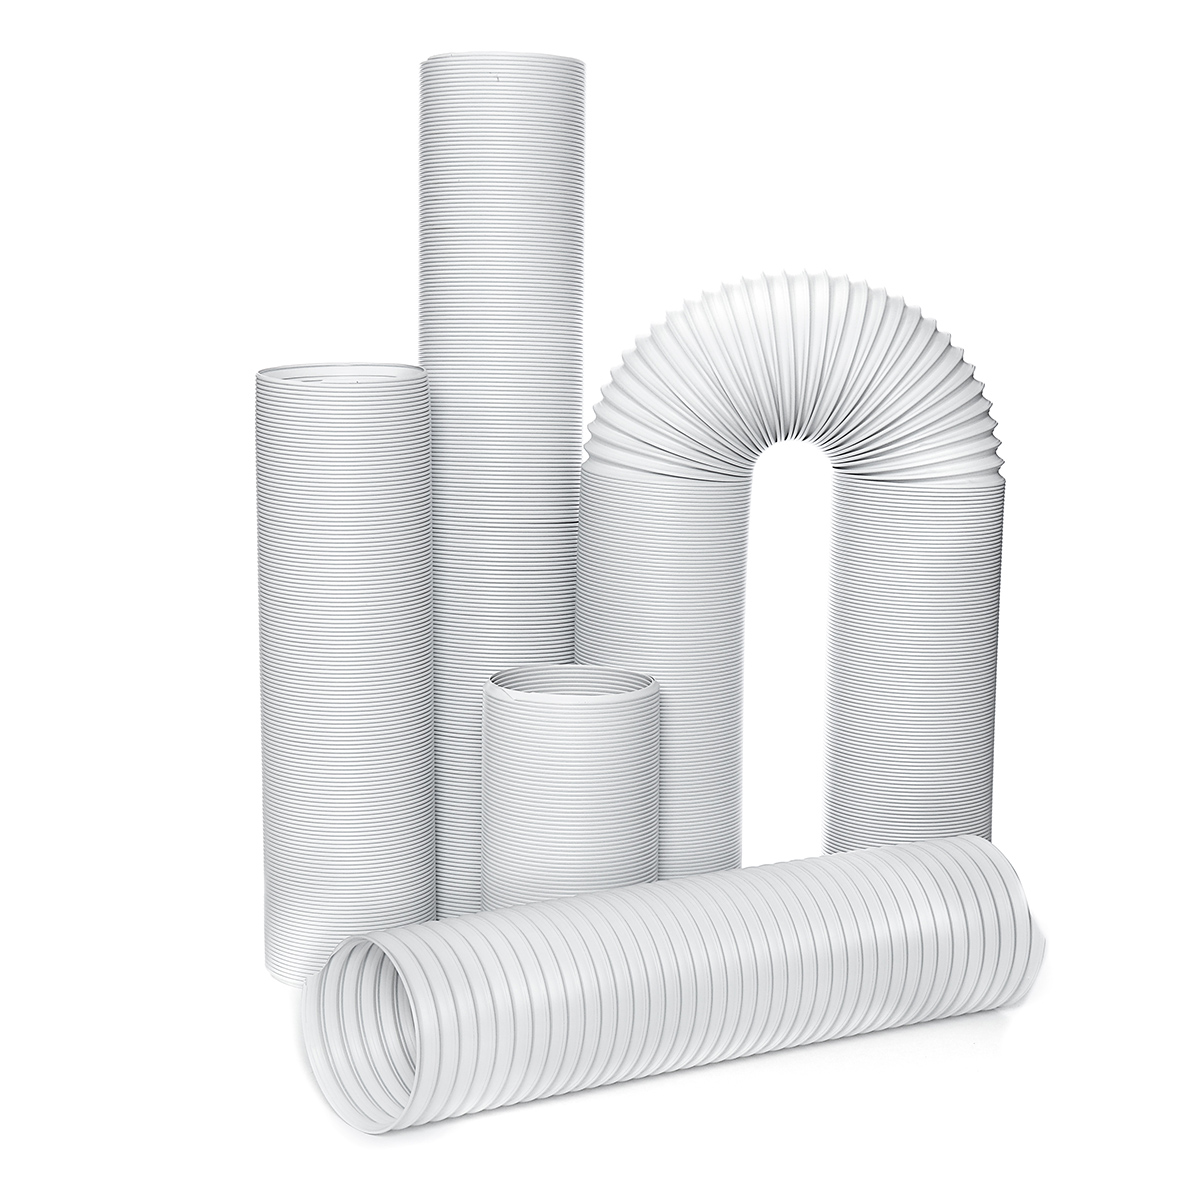 DIA-5-Universal-Pipe-Duct-Air-Conditioner-Exhaust-Hose-For-Range-Hoods-Kitchen-1554659-1